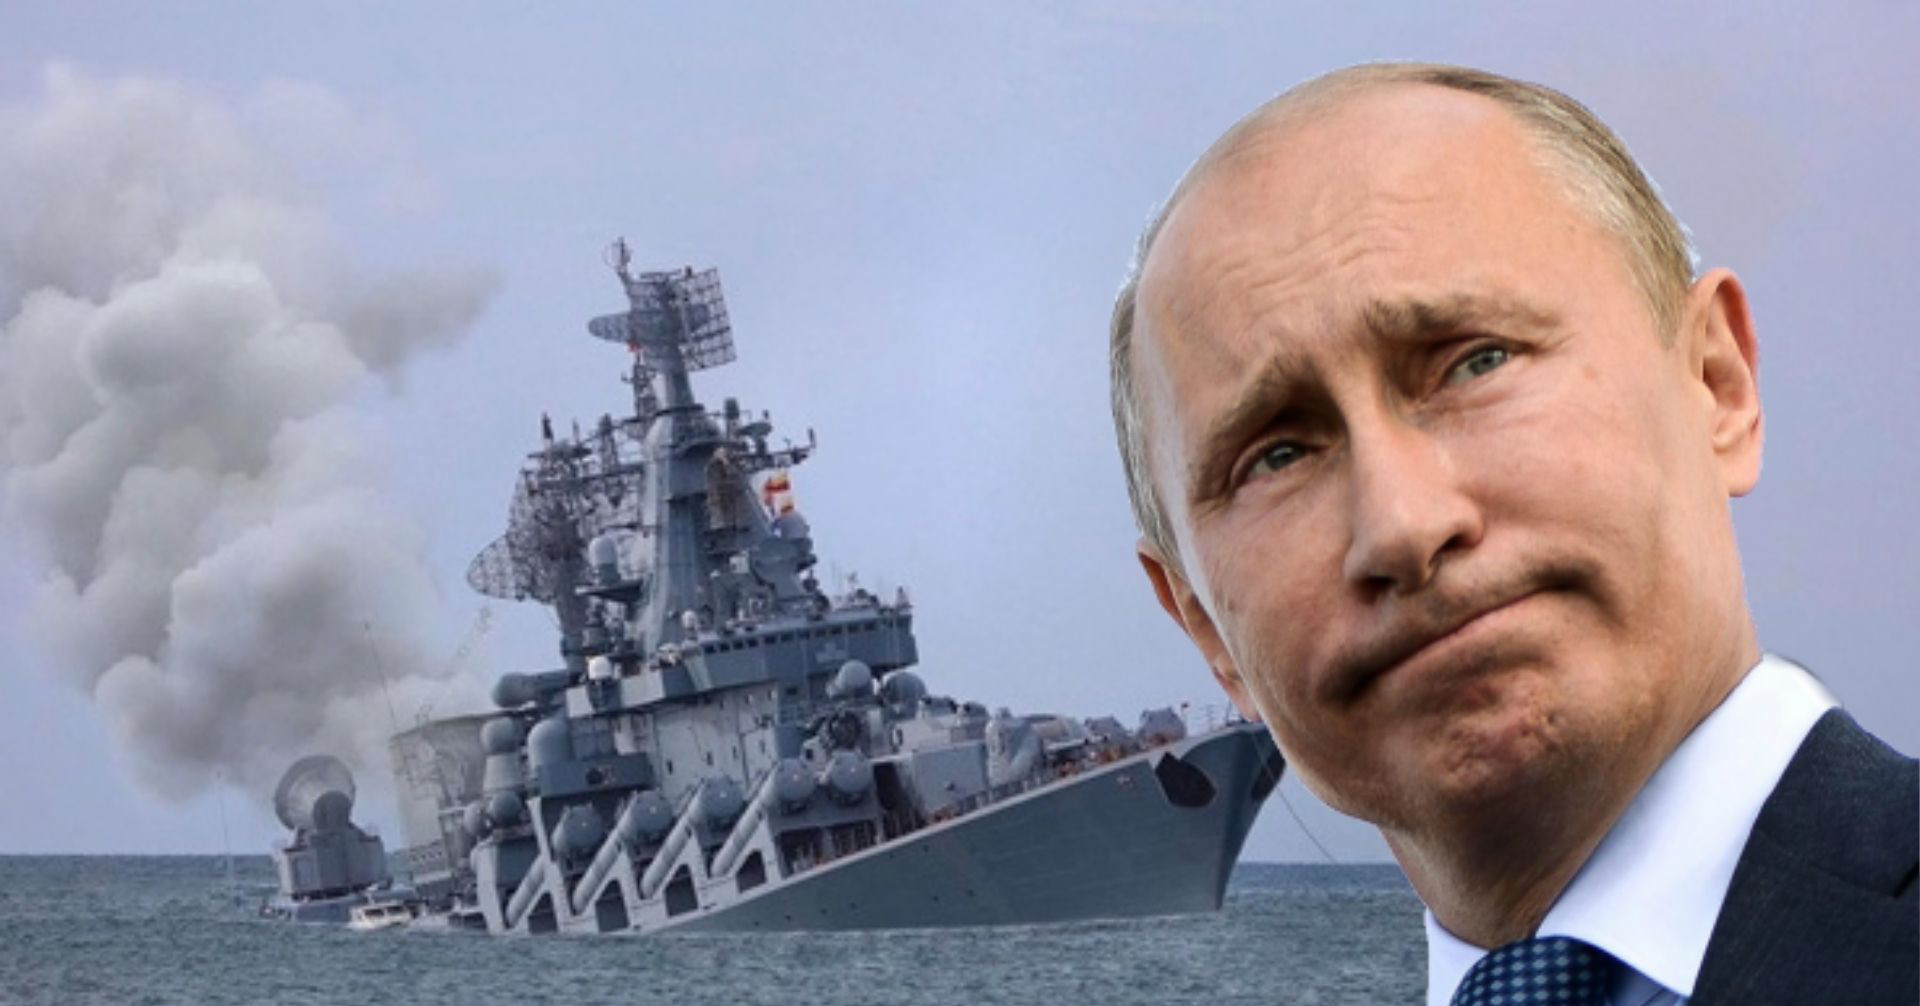 President Putin launched a “rescue mission” to protect the secrets of the Moscow flagship